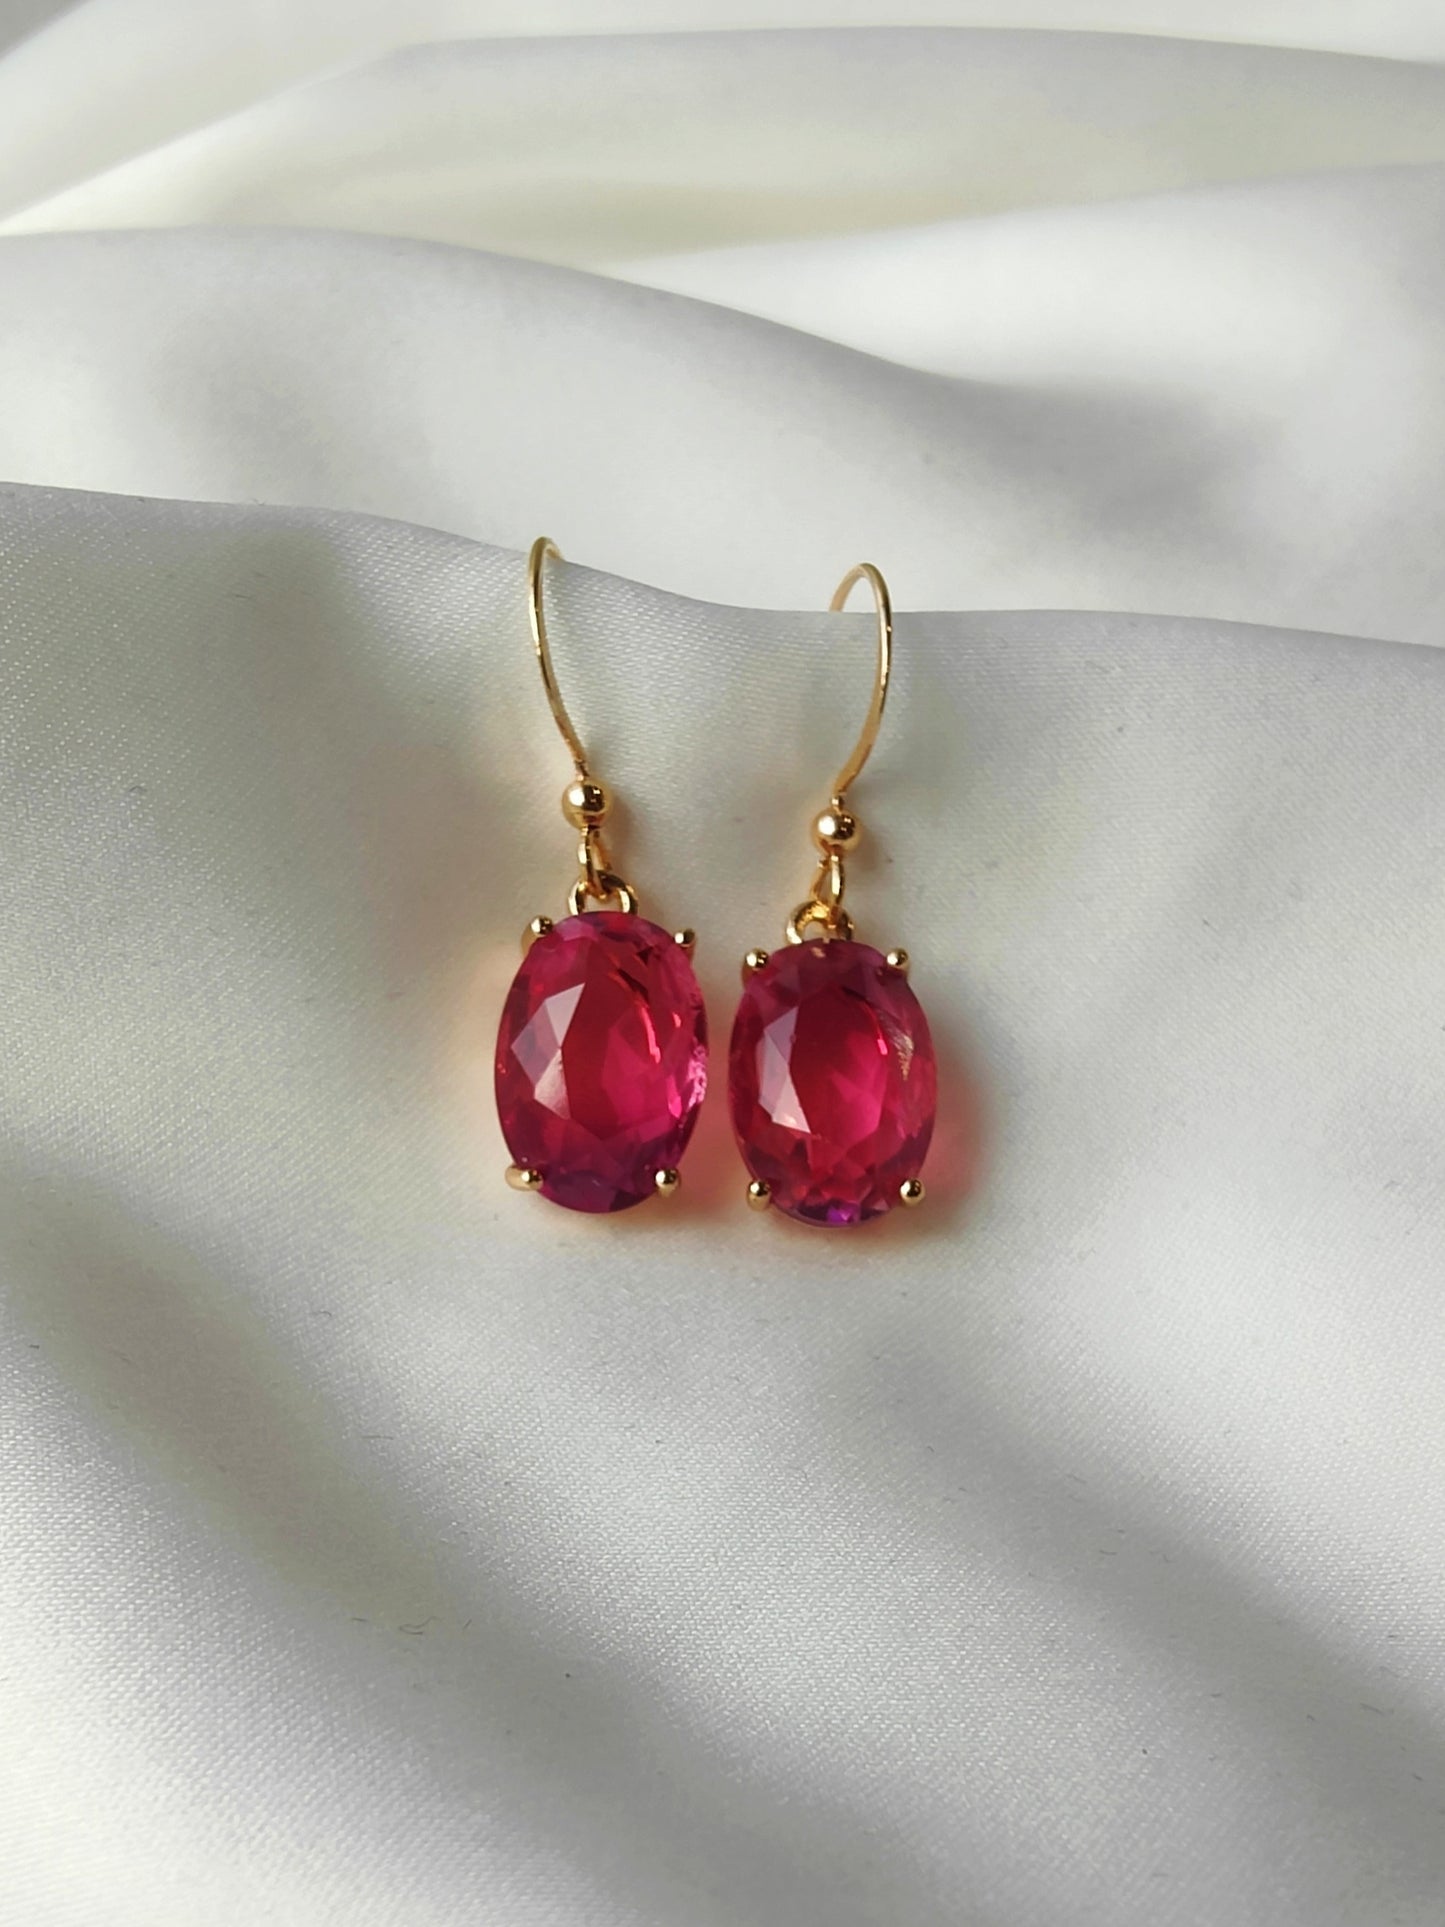 Ombre Earrings - Berry pink